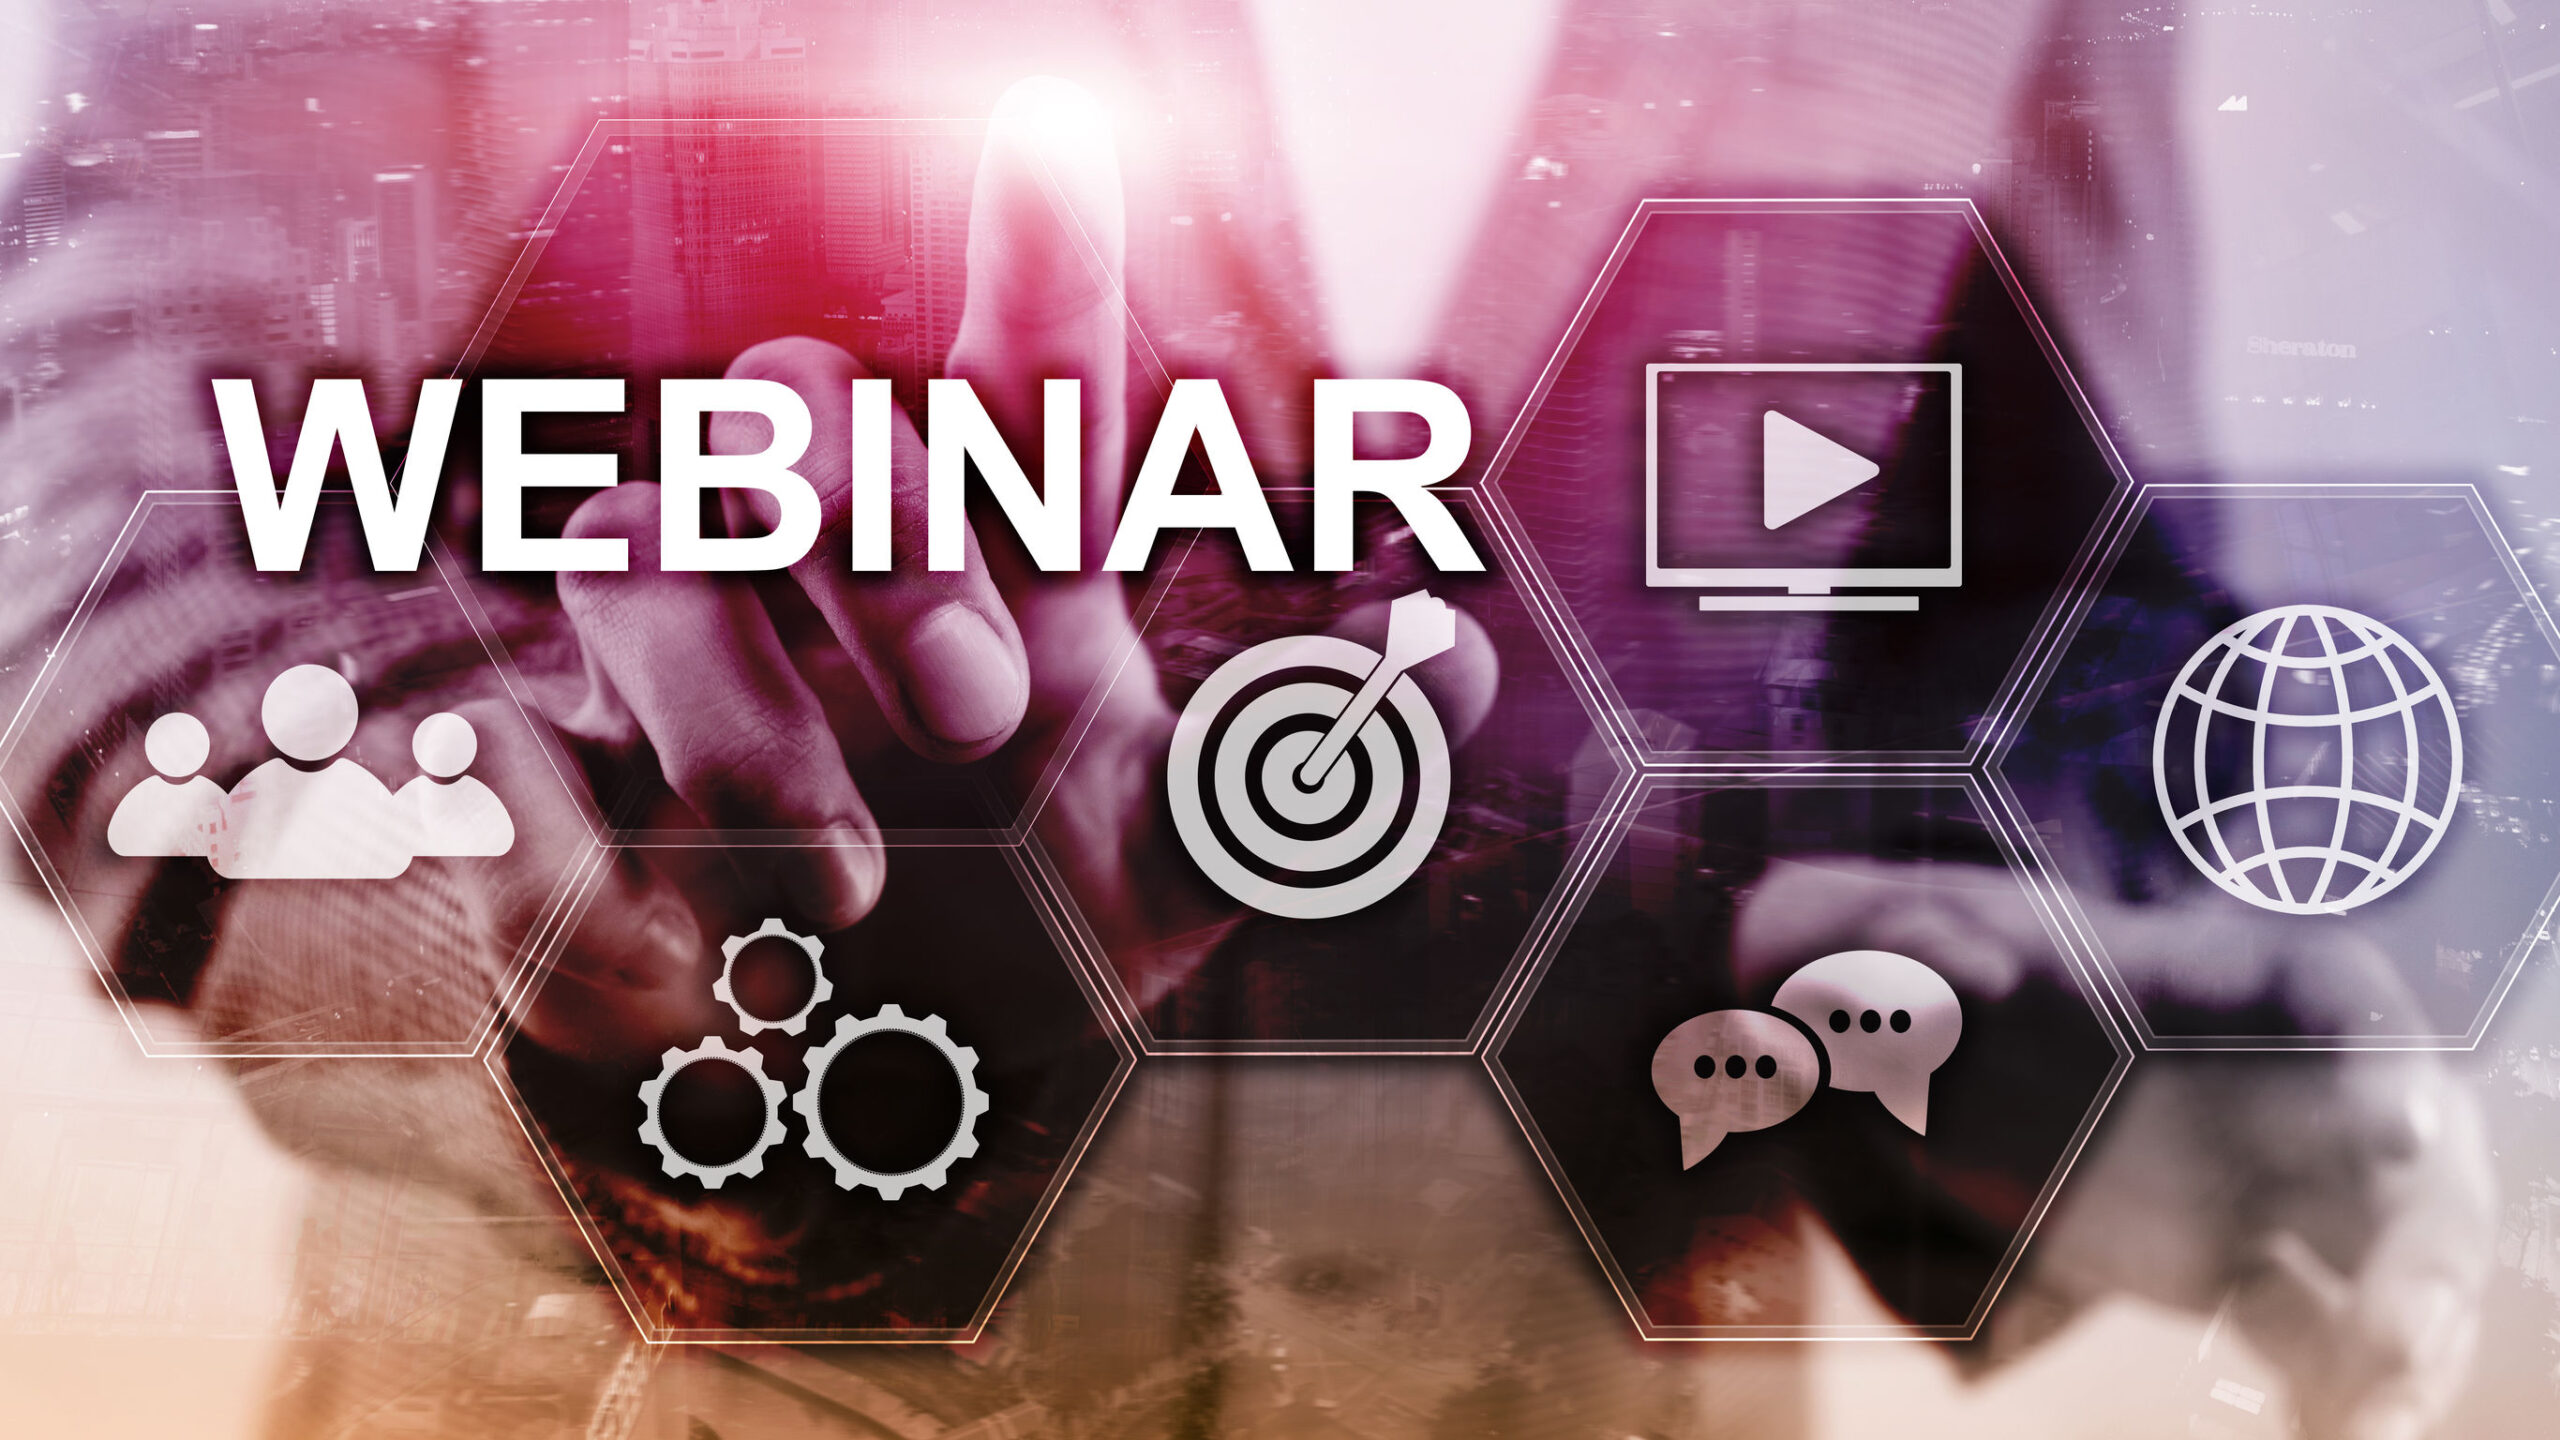 Explore What aACE Can Do for You in Our October Webinars